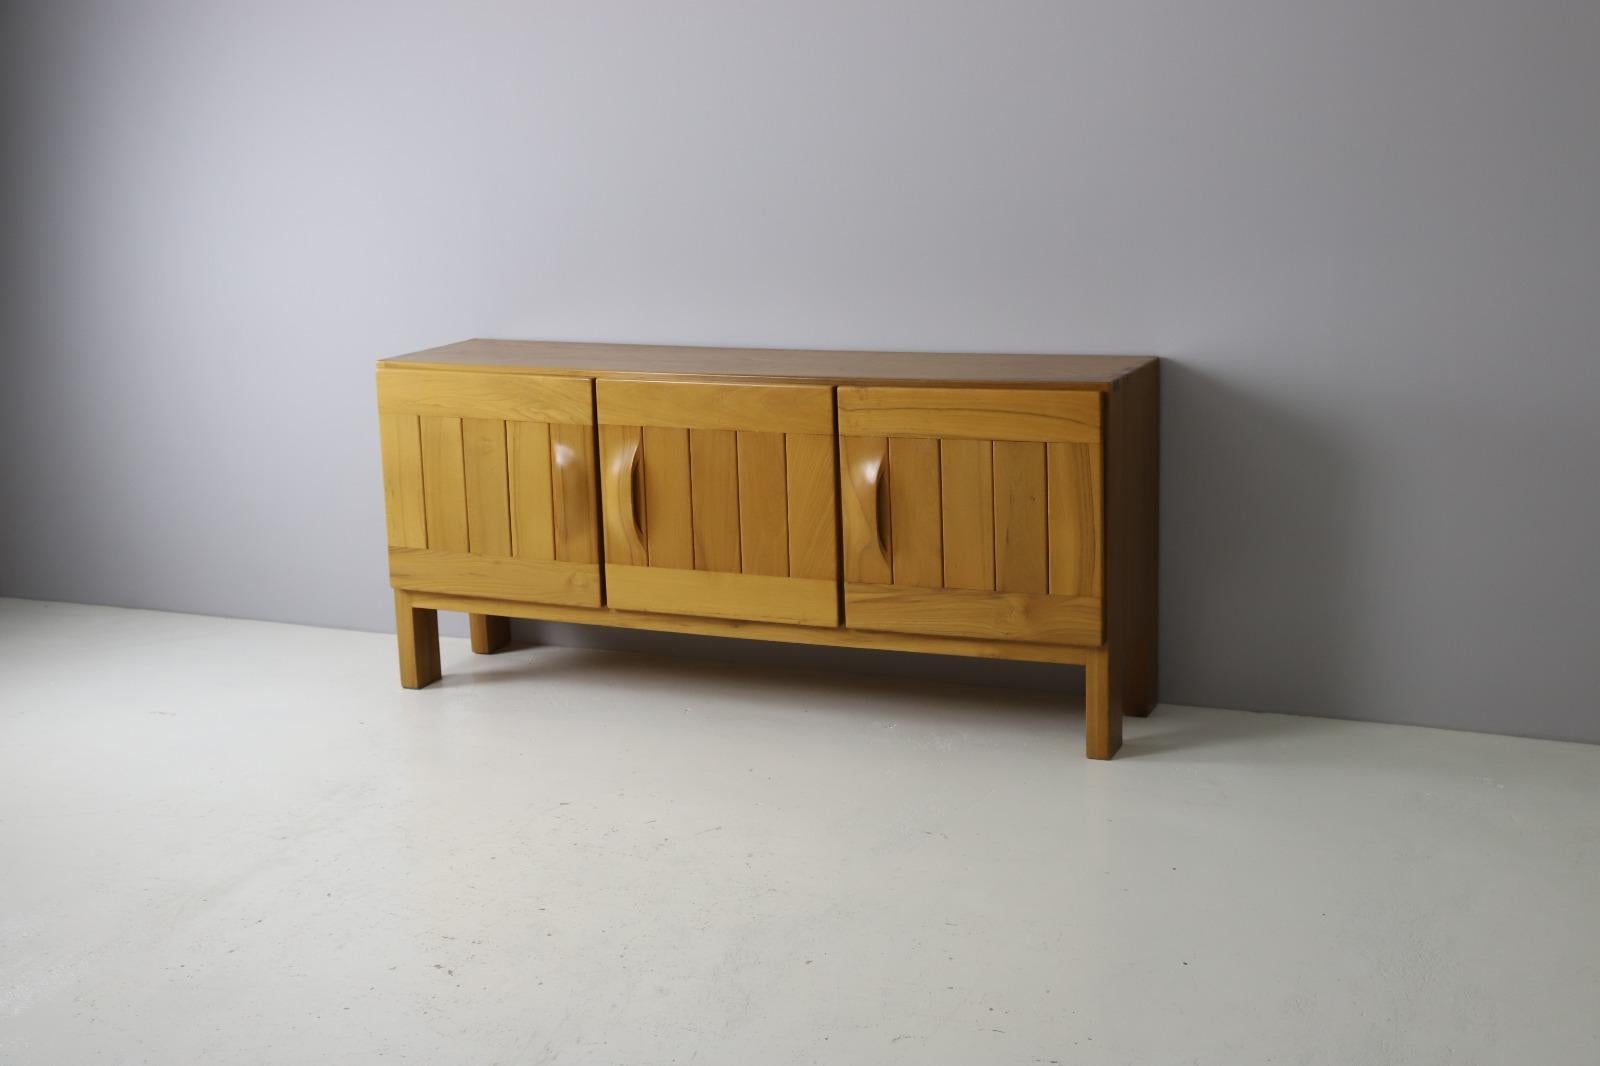 Large French sideboard produced by Maison Regain in solid elm wood. The finger joints on both upper corners and the large solid wood door pulls are very typical for Maison Regains designs and craftsmanship. The heavily made doors give you access to